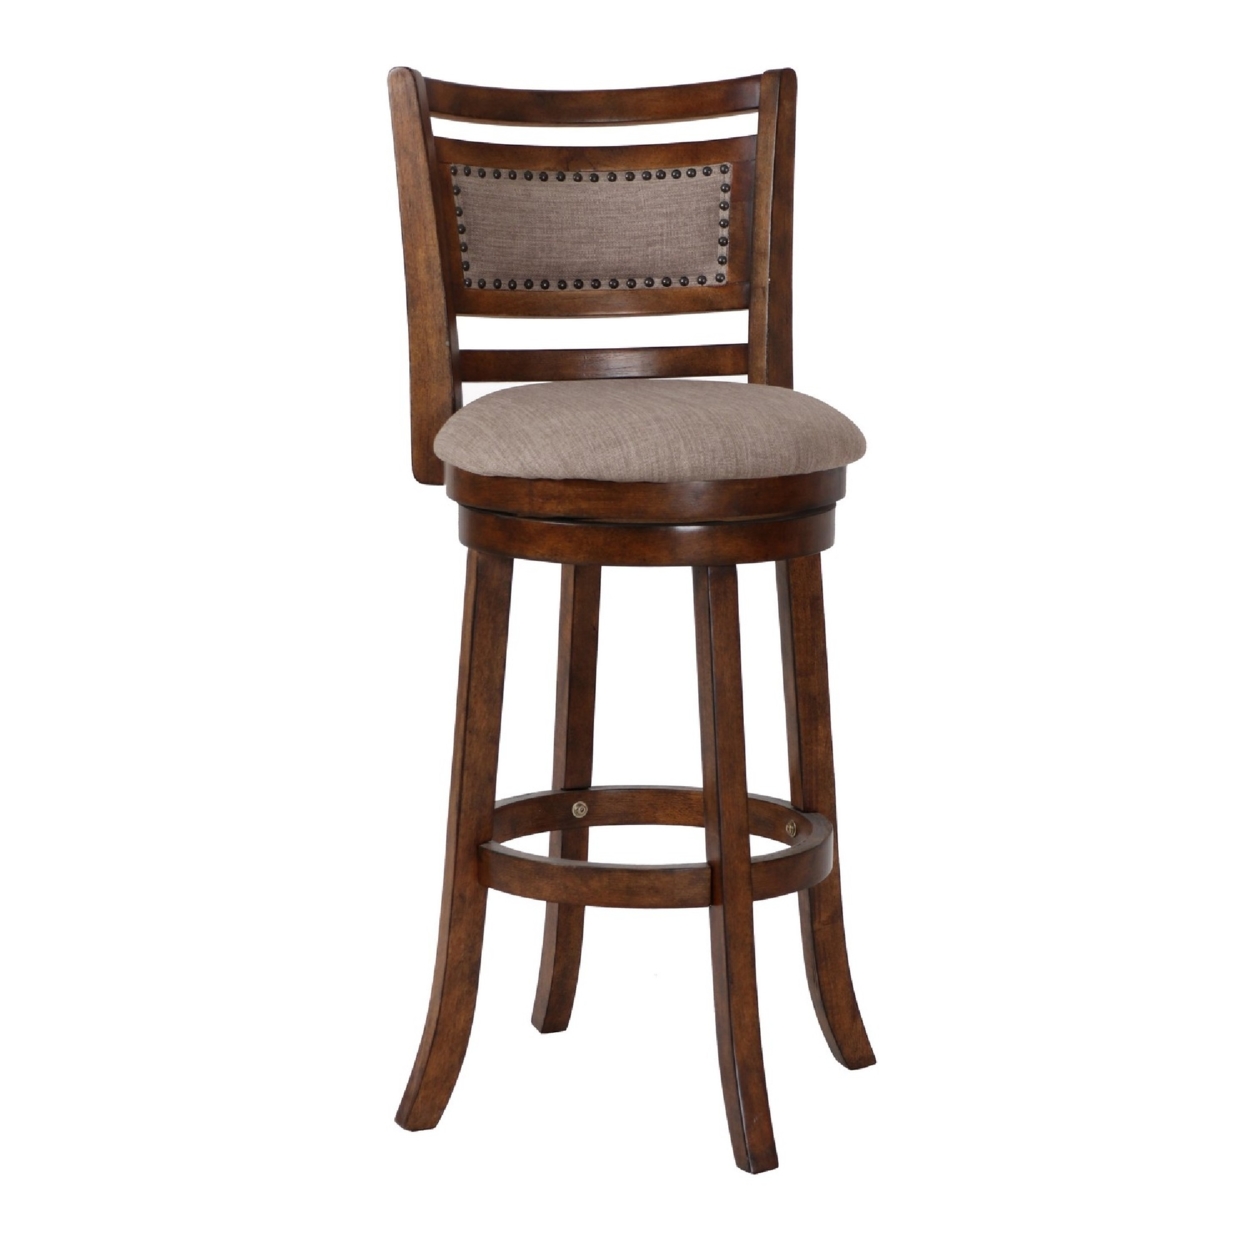 Curved Swivel Barstool With Fabric Padded Seating, Brown And Beige- Saltoro Sherpi